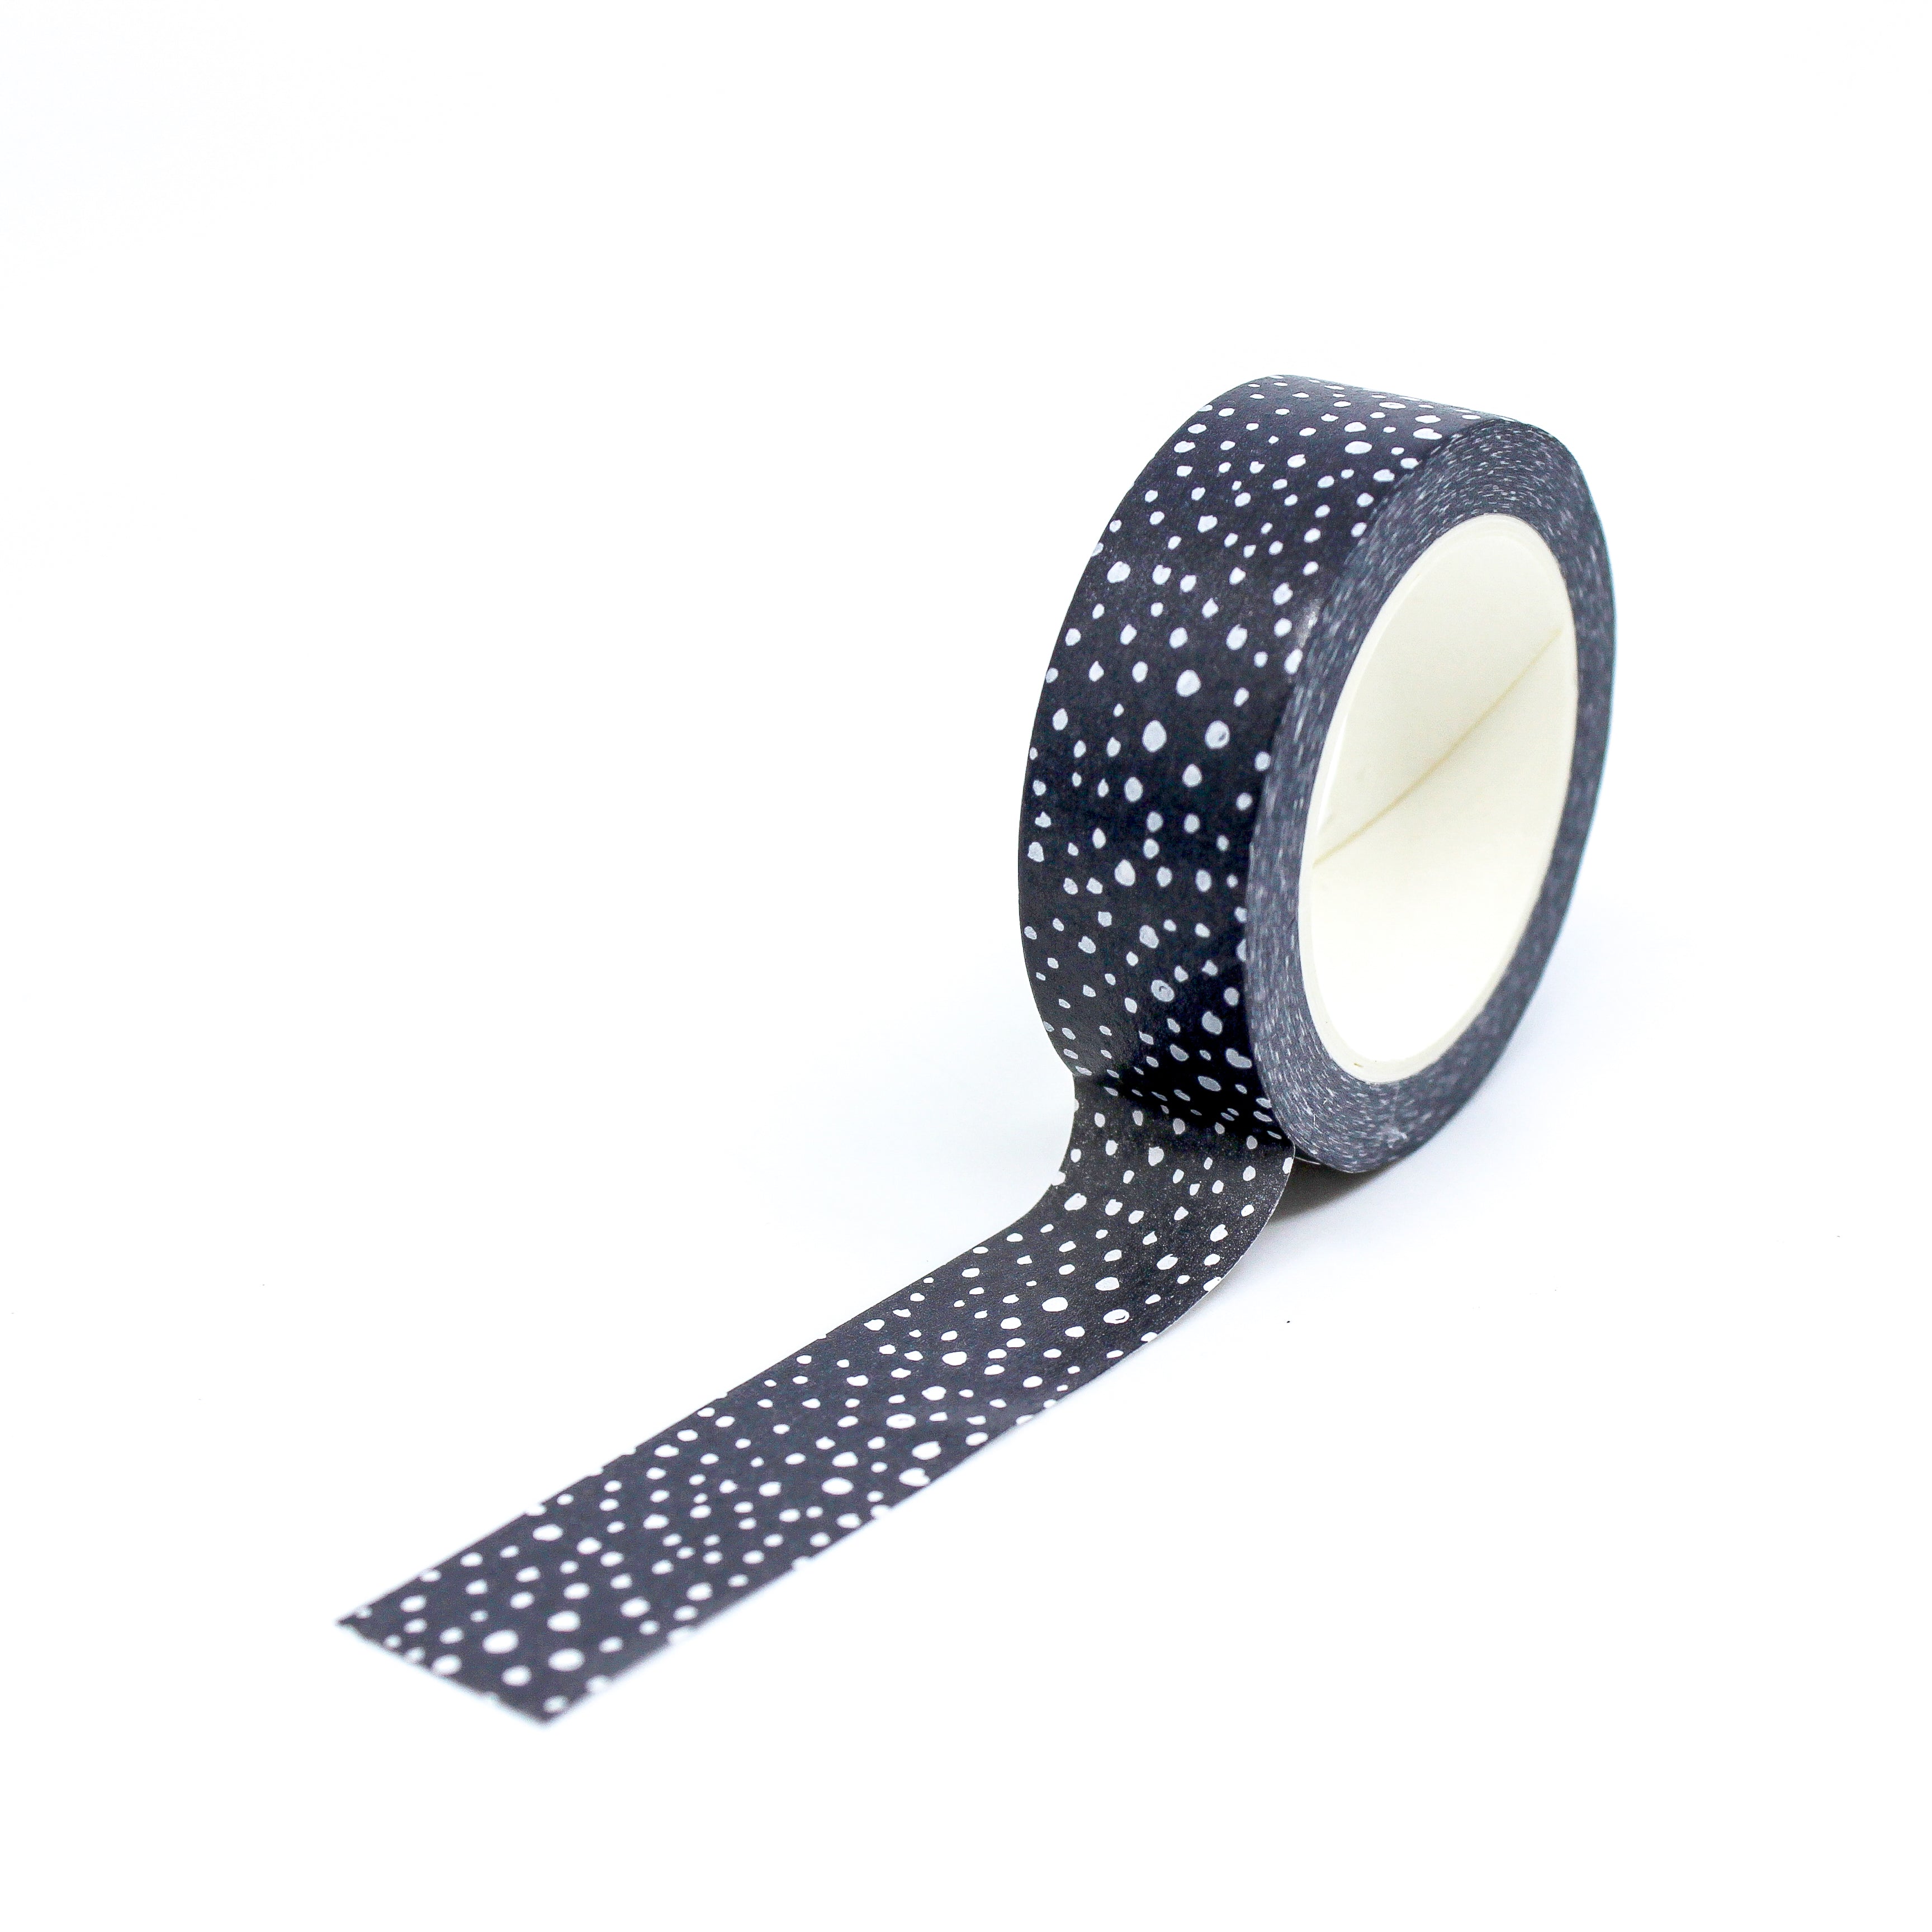 Add a subtle and modern touch to your crafts with our tiny speckles black washi tape, featuring delicate and scattered speckles in black for a minimalist and contemporary look. This tape is sold at BBB Supplies Craft Shop.